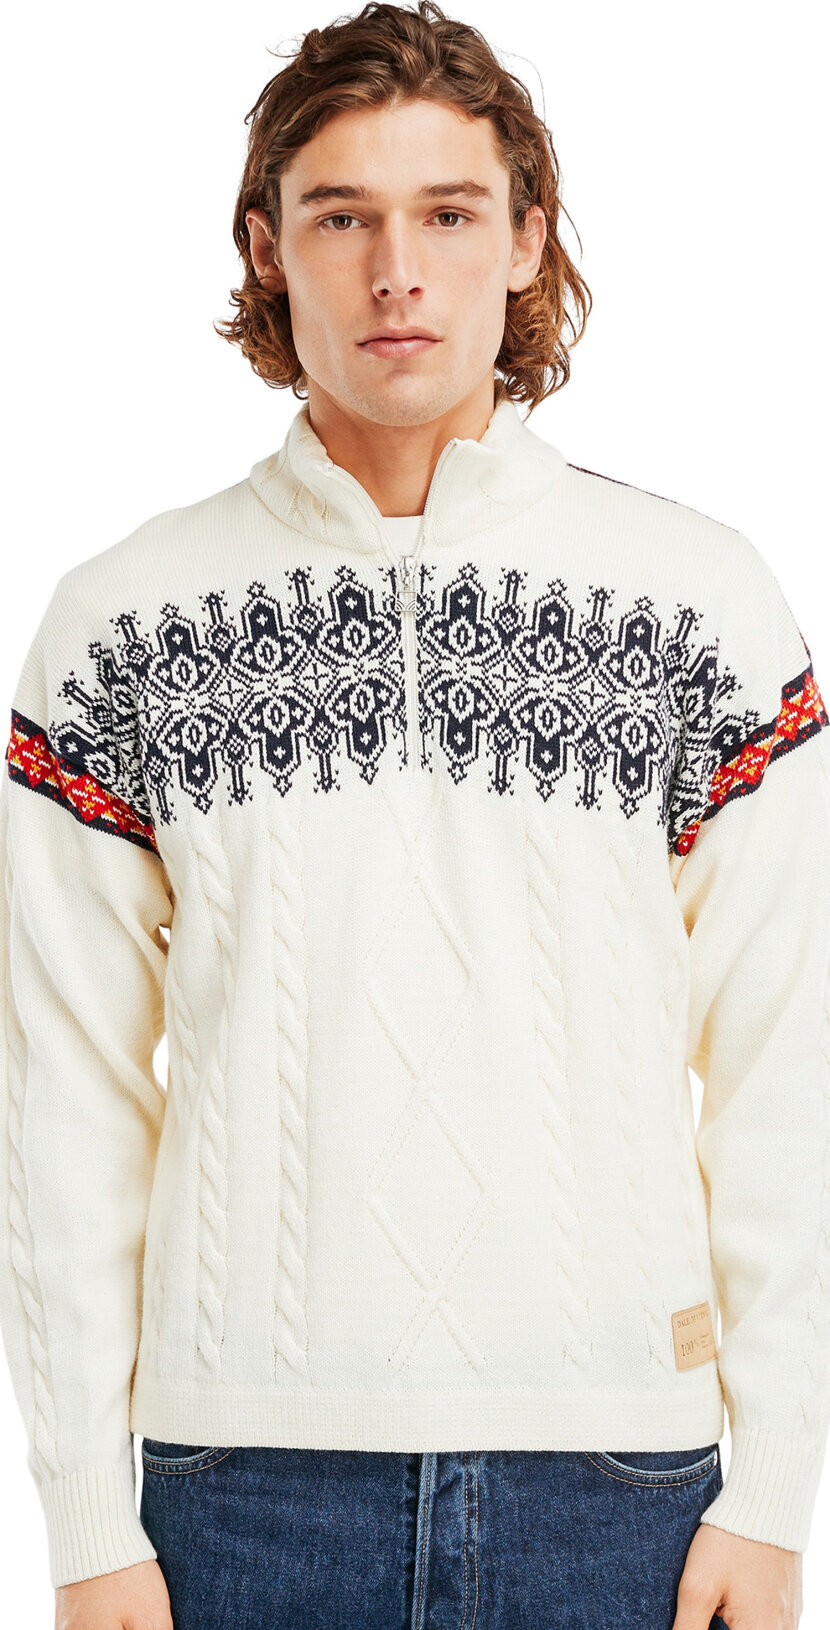 White Mens - Dale by Aspøy of - 199,90 € COLDSEASON.com, Sweater Norway